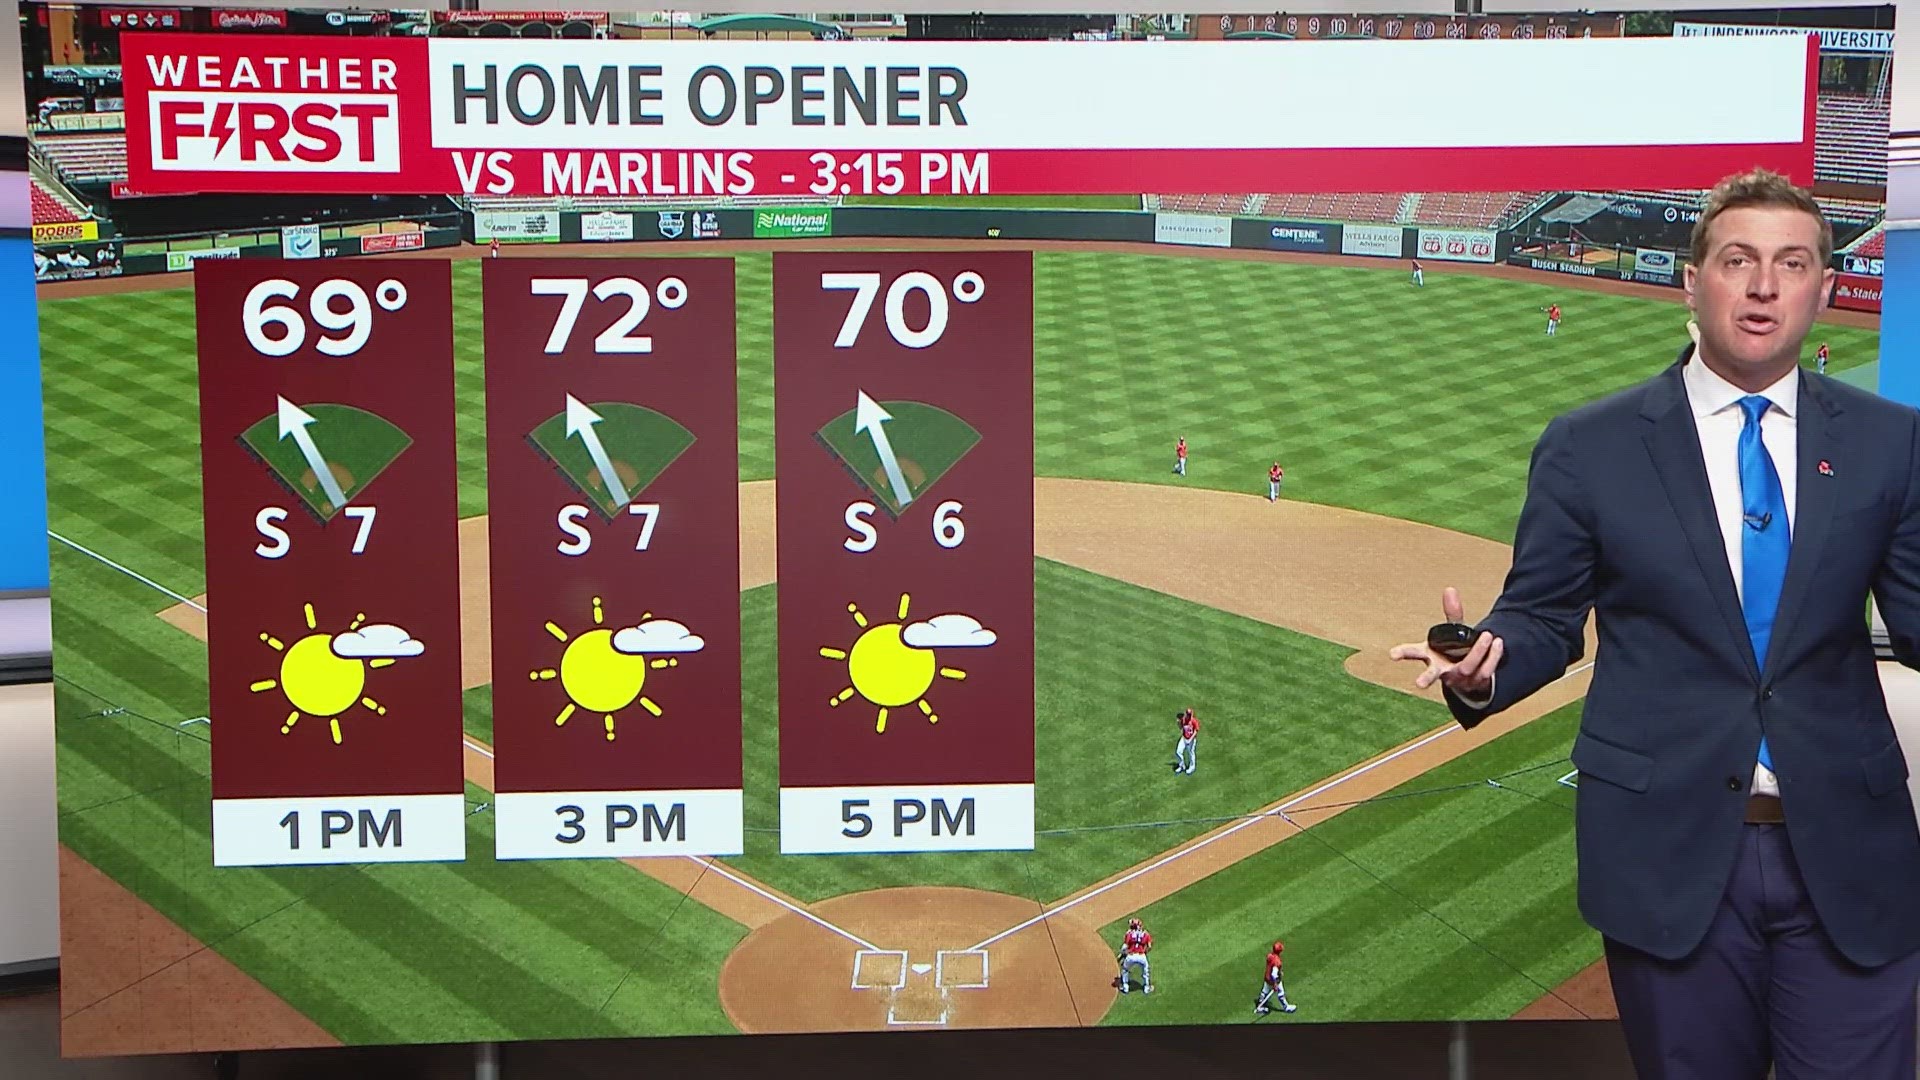 The weather looks good for Thursday, April 4. The Cardinals will play at Busch Stadium.